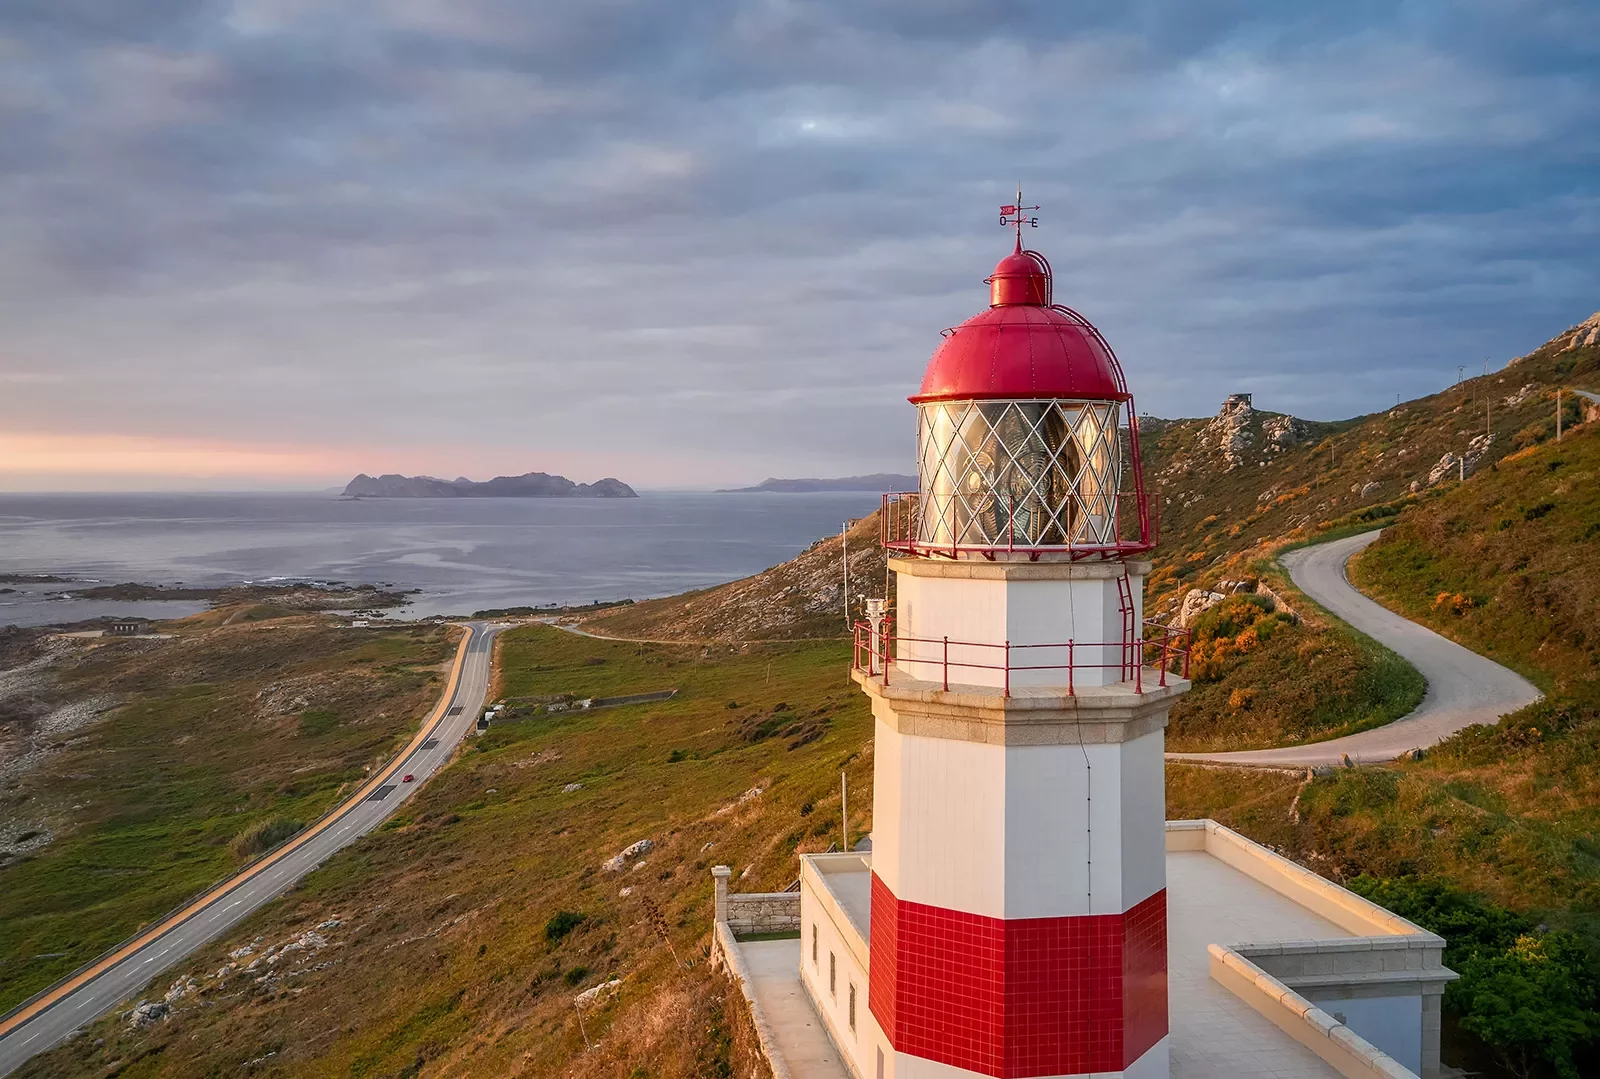 Wide shot of Spanish coastline during sunset, red and white lighthouse in foreground.